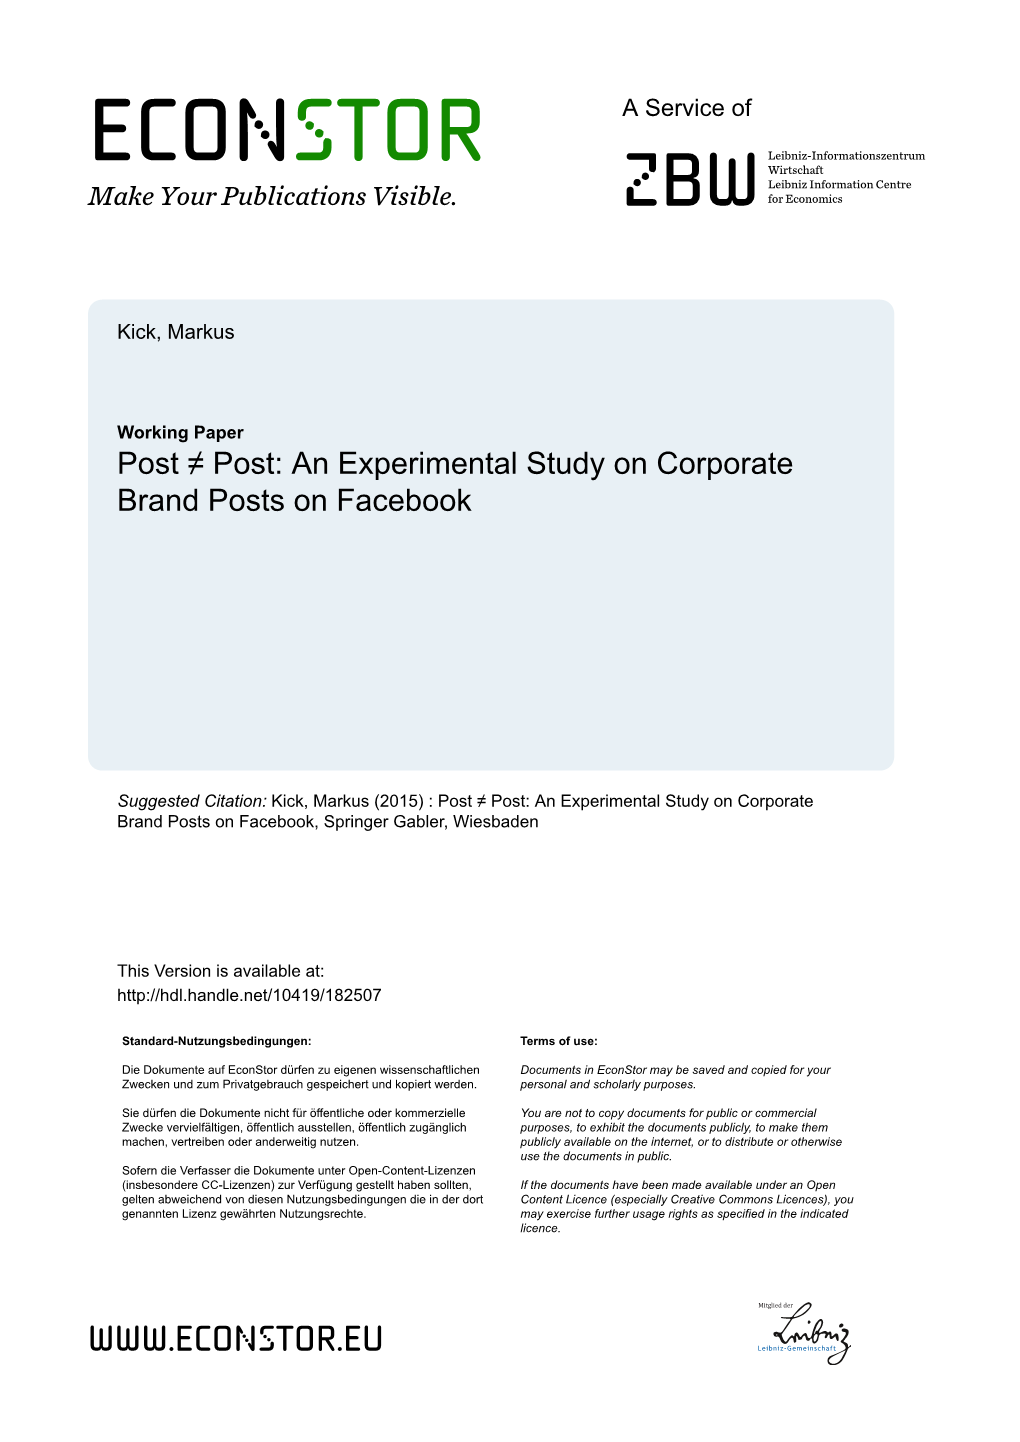 An Experimental Study on Corporate Brand Posts on Facebook